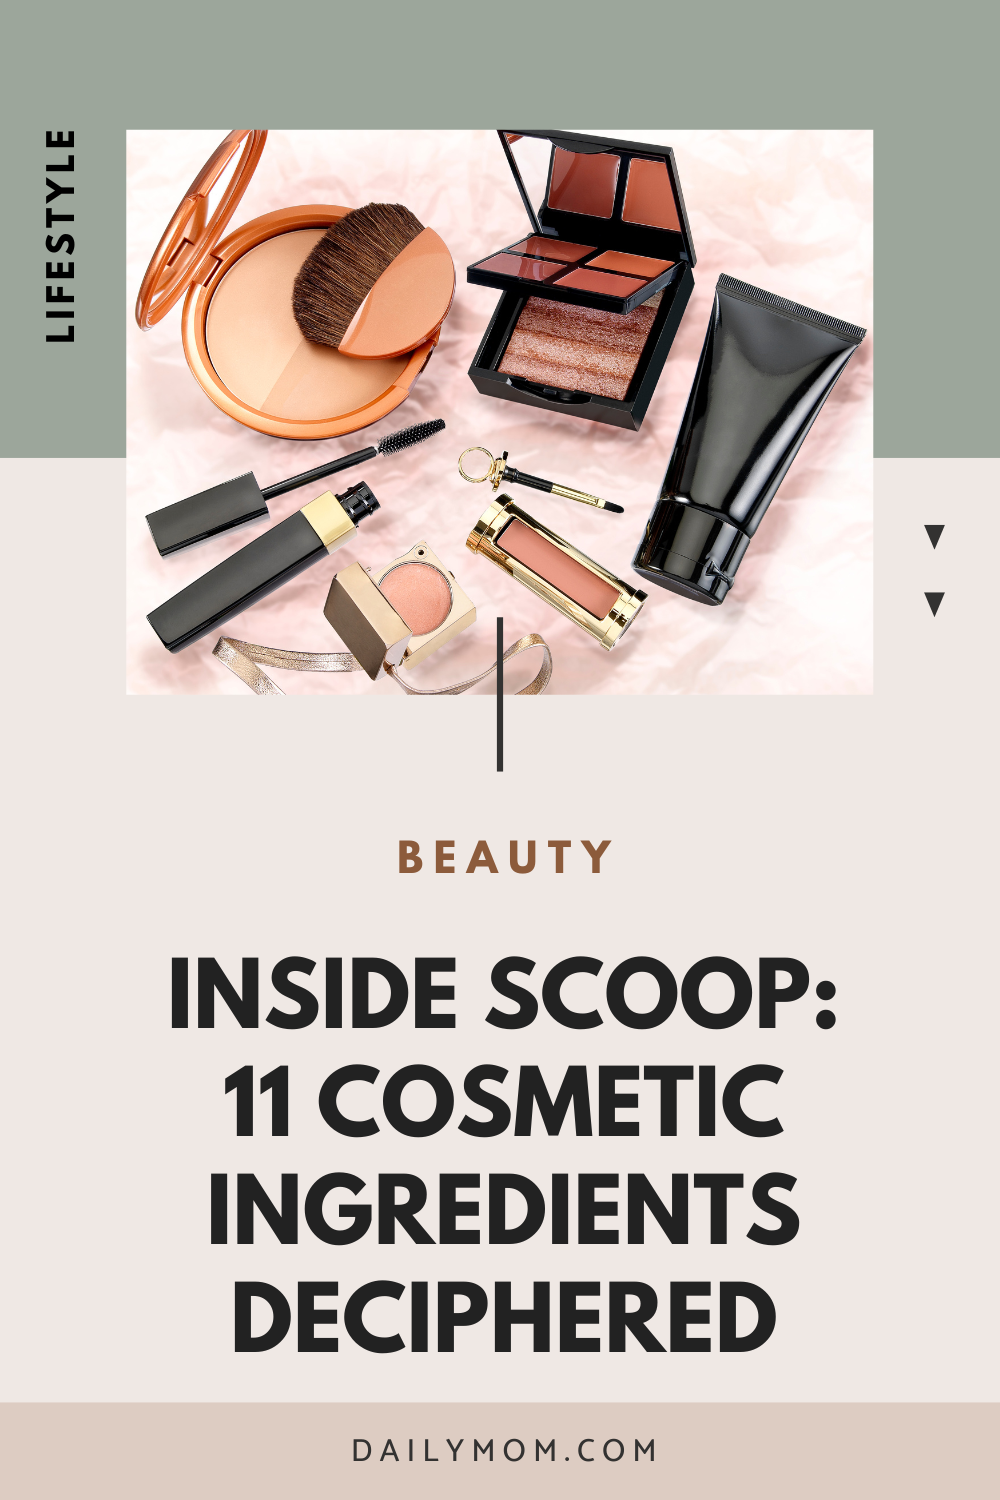 The Inside Scoop: 11 Common Cosmetic Ingredients Deciphered